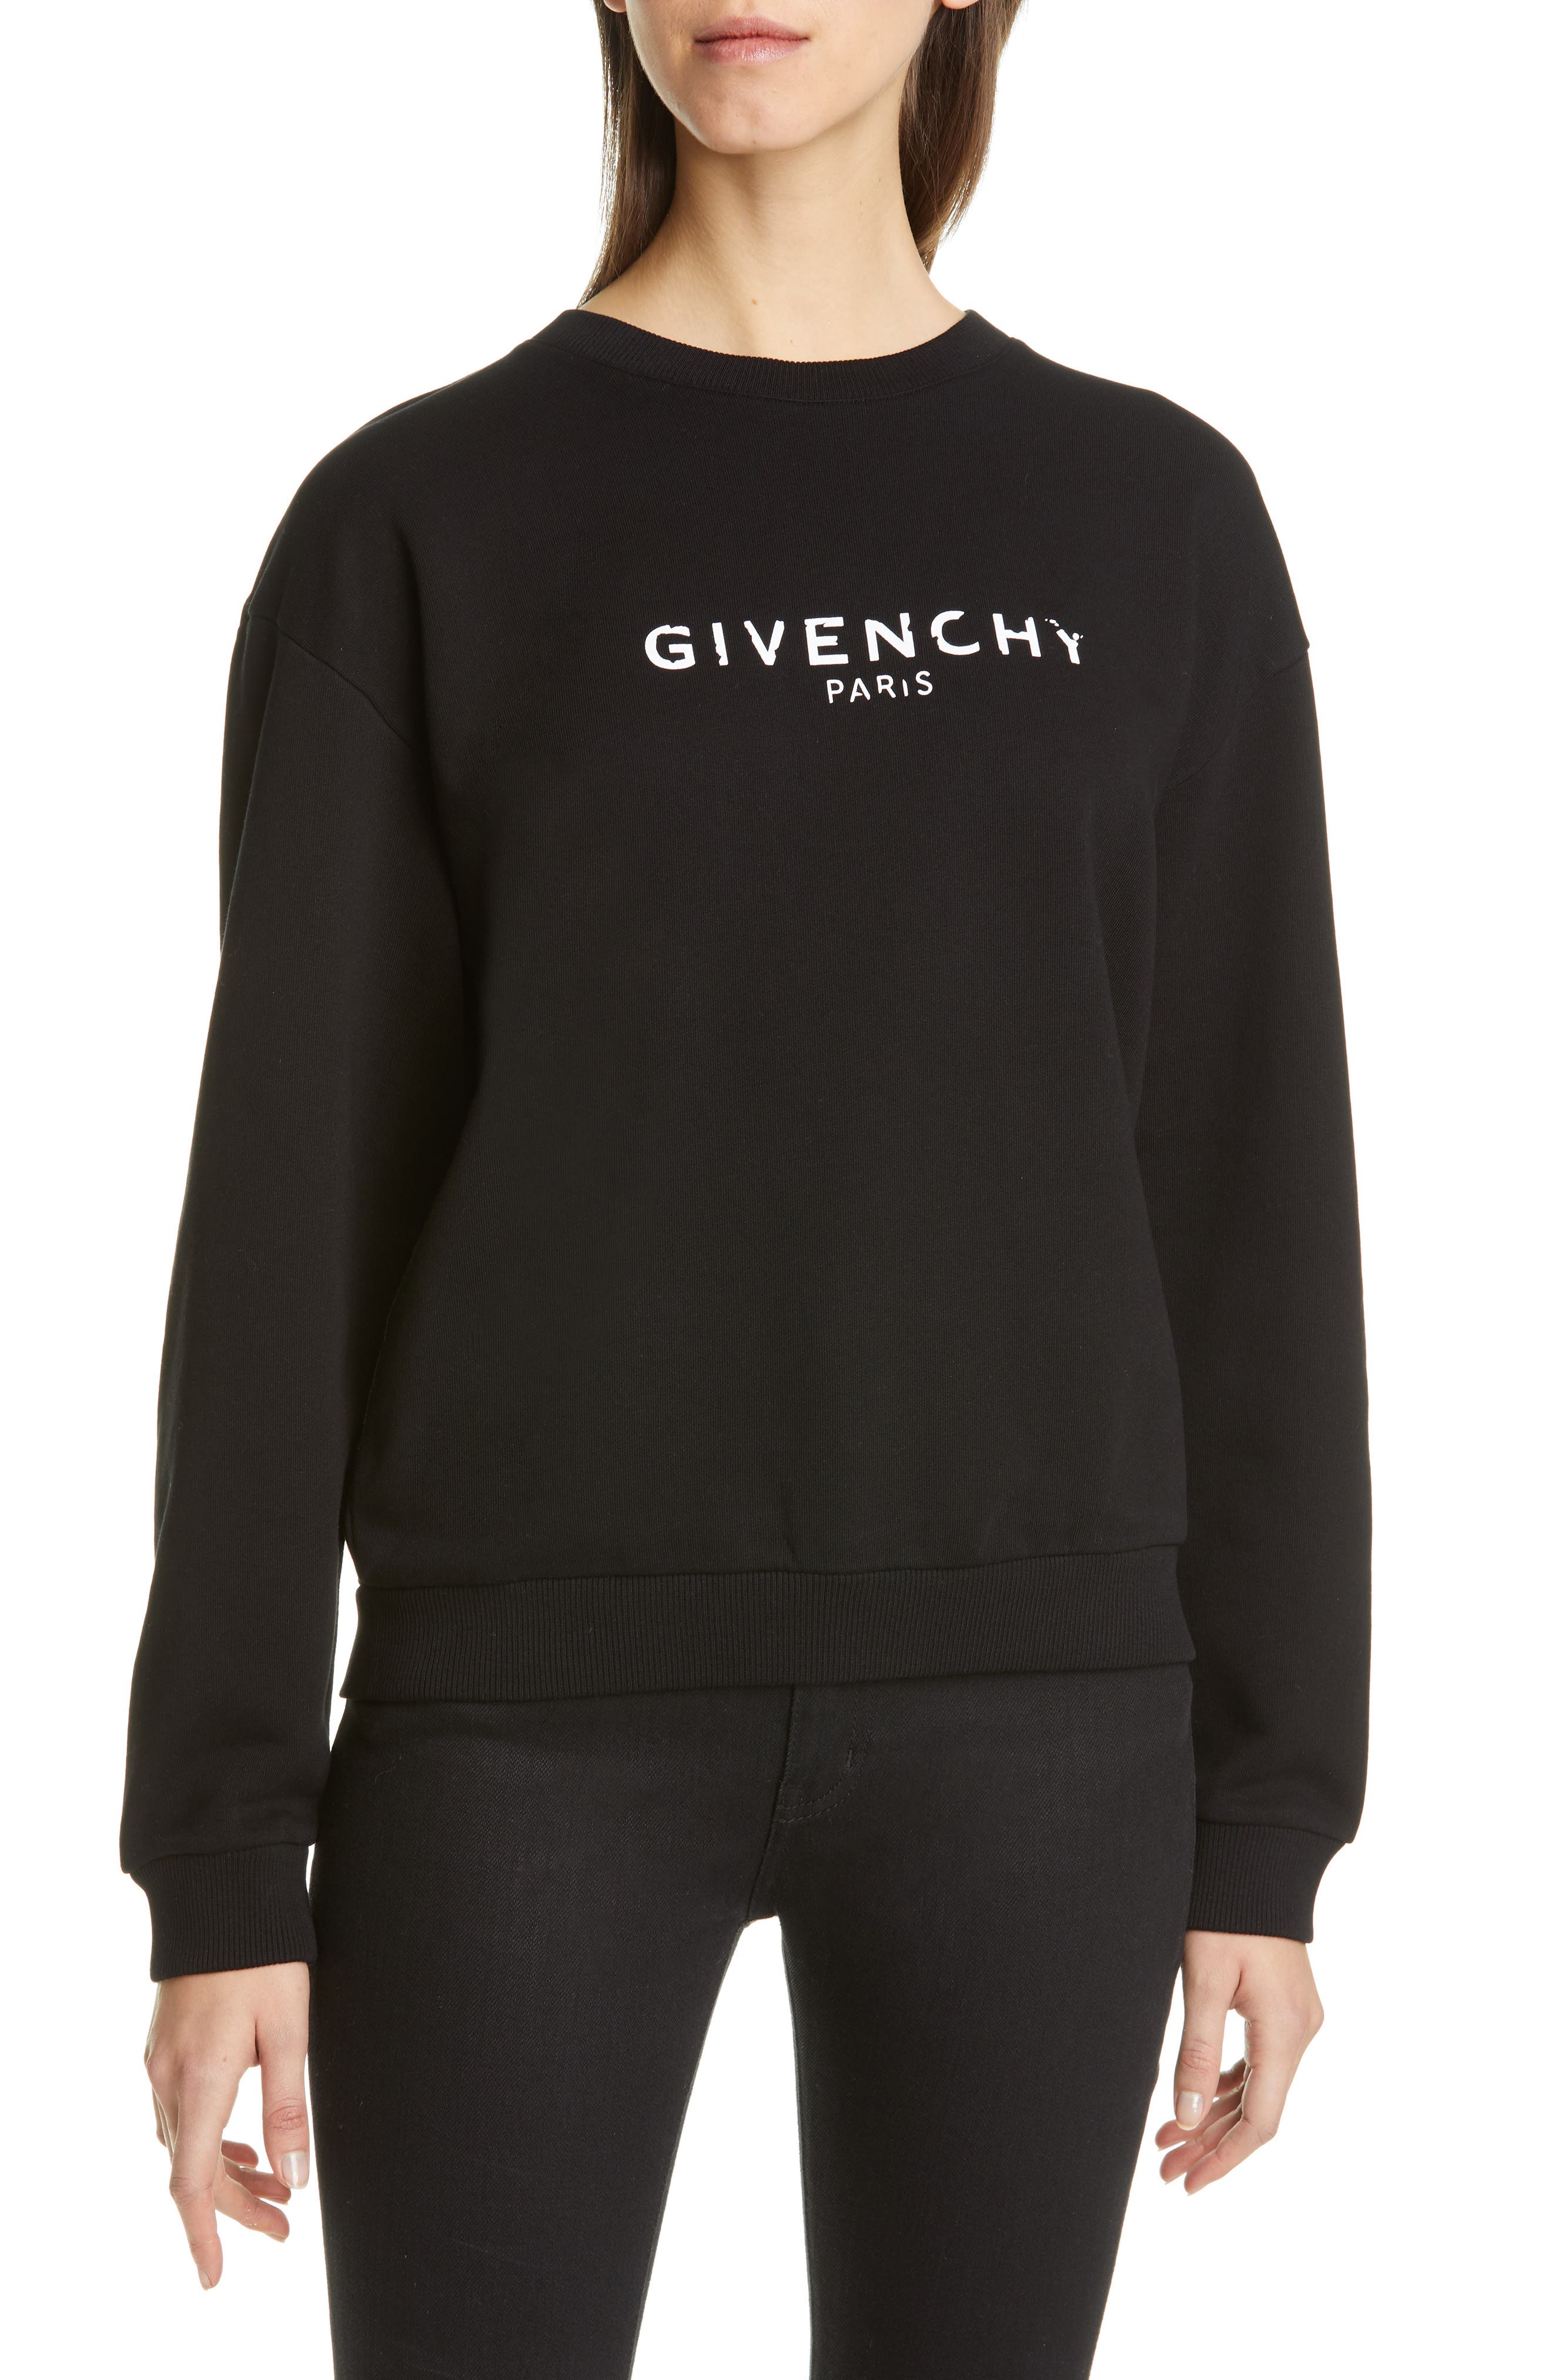 Givenchy Women S Clothing Size Chart